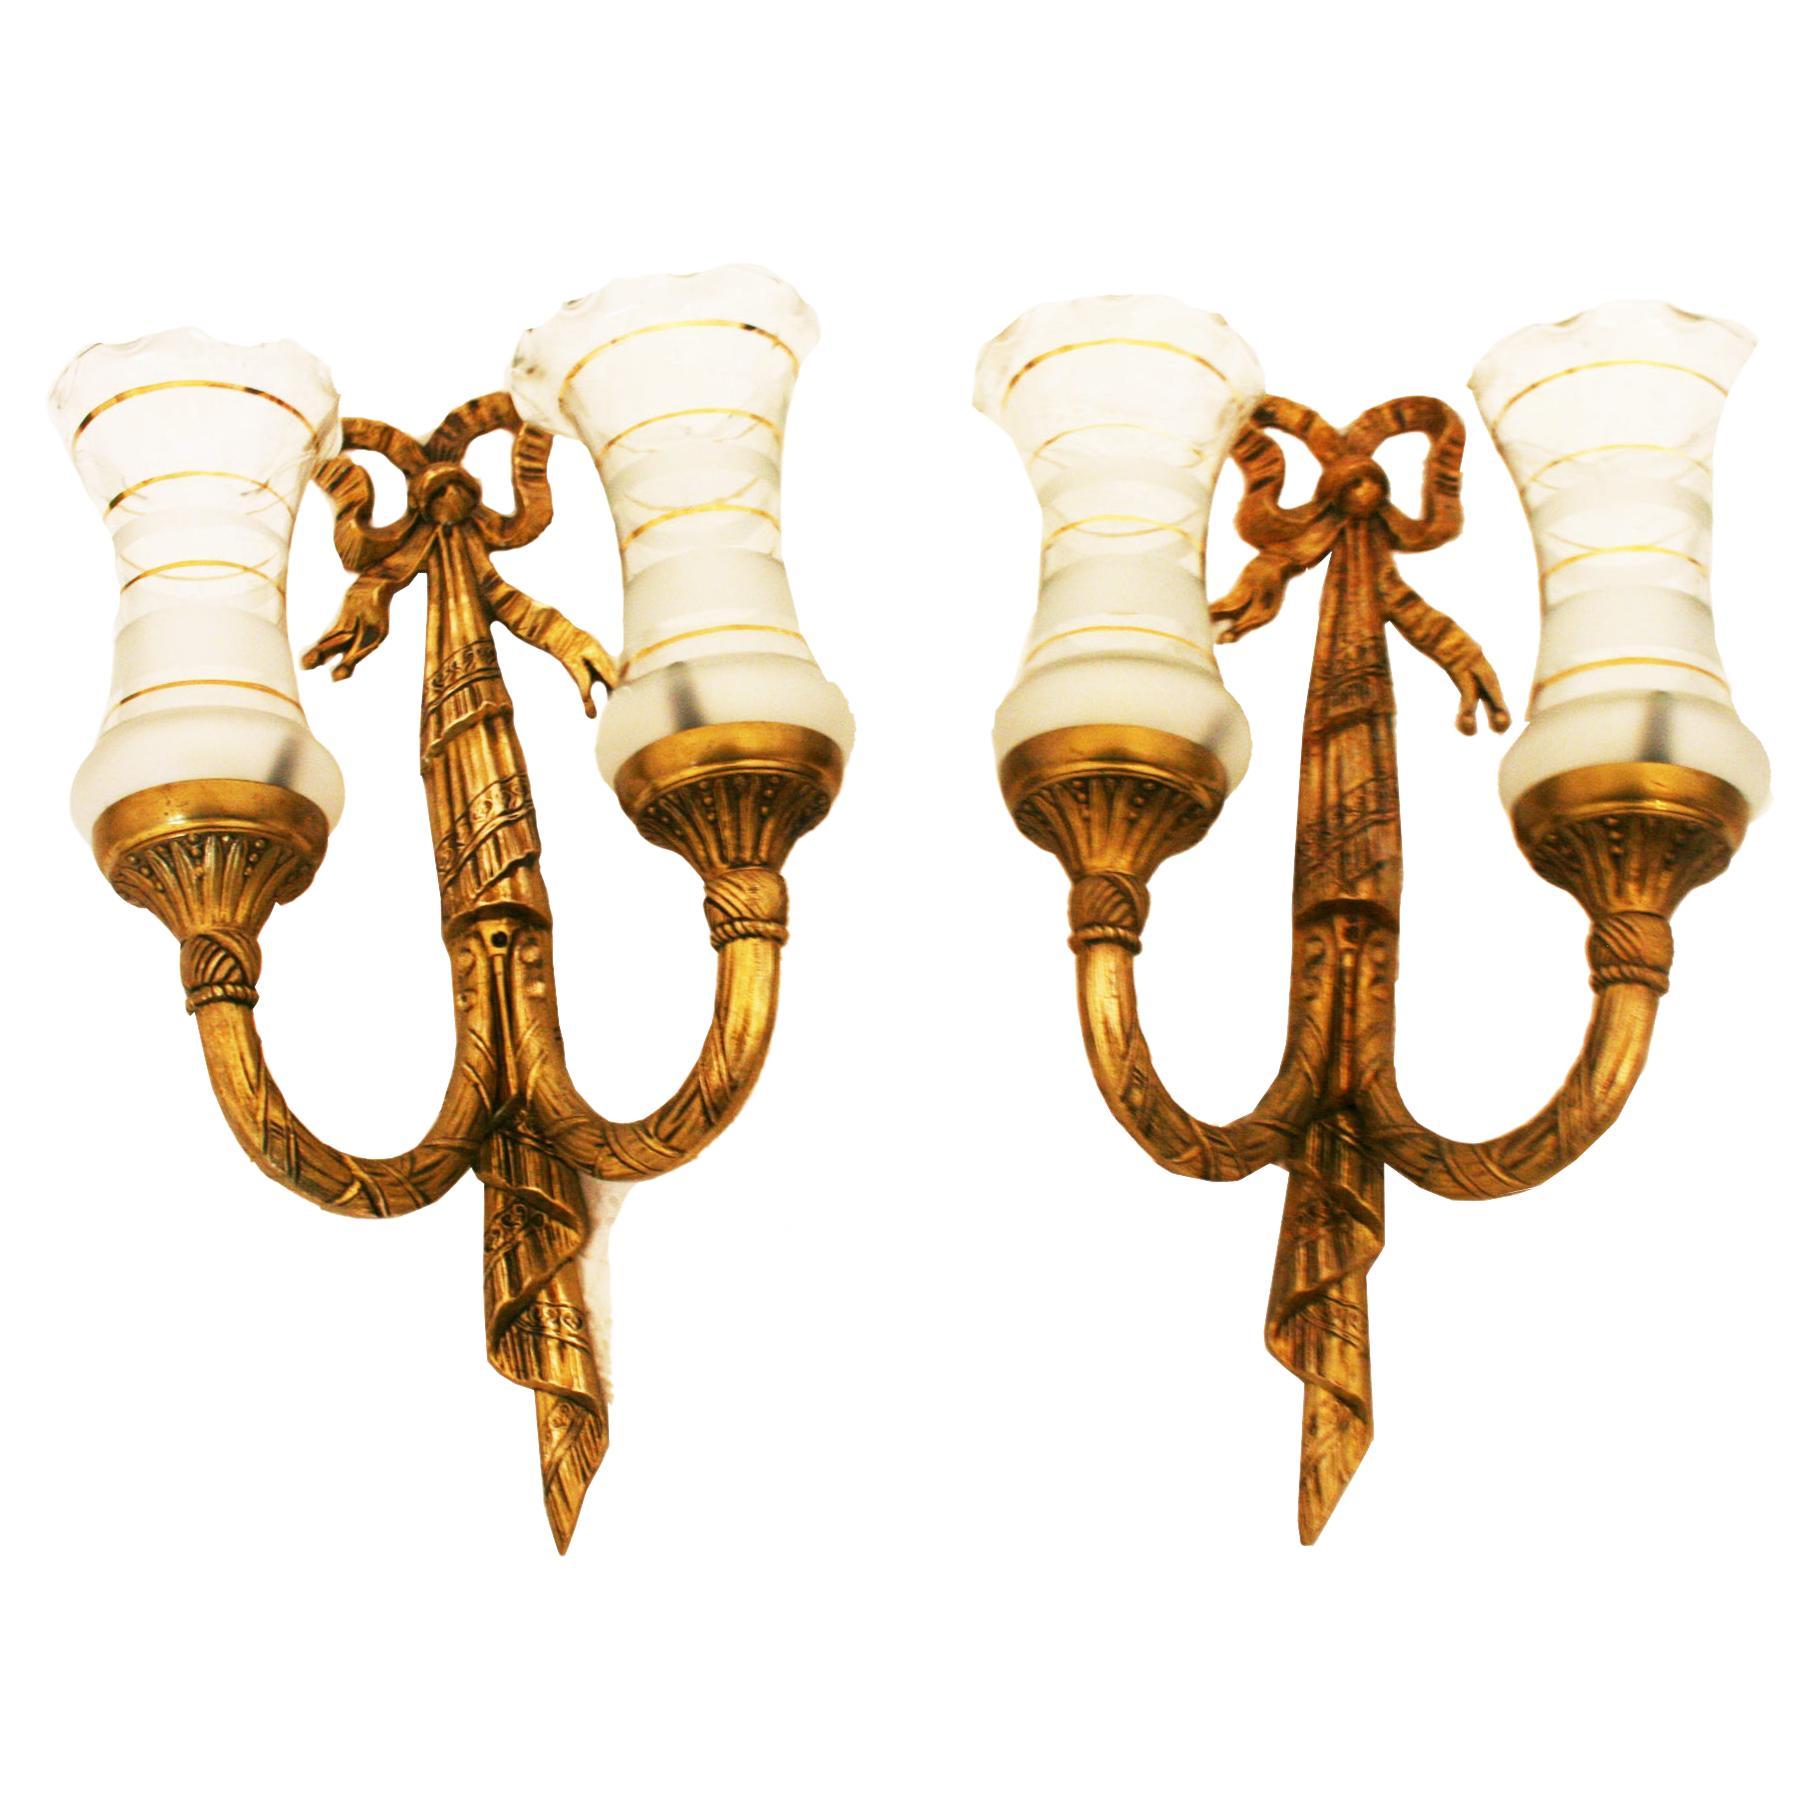 The price for the lot

Pair of midcentury brass wall sconces Louis XVI style 
 with two lights.

Brass and gold trimmed glass.

Bathroom fixtures, bathroom lights.

